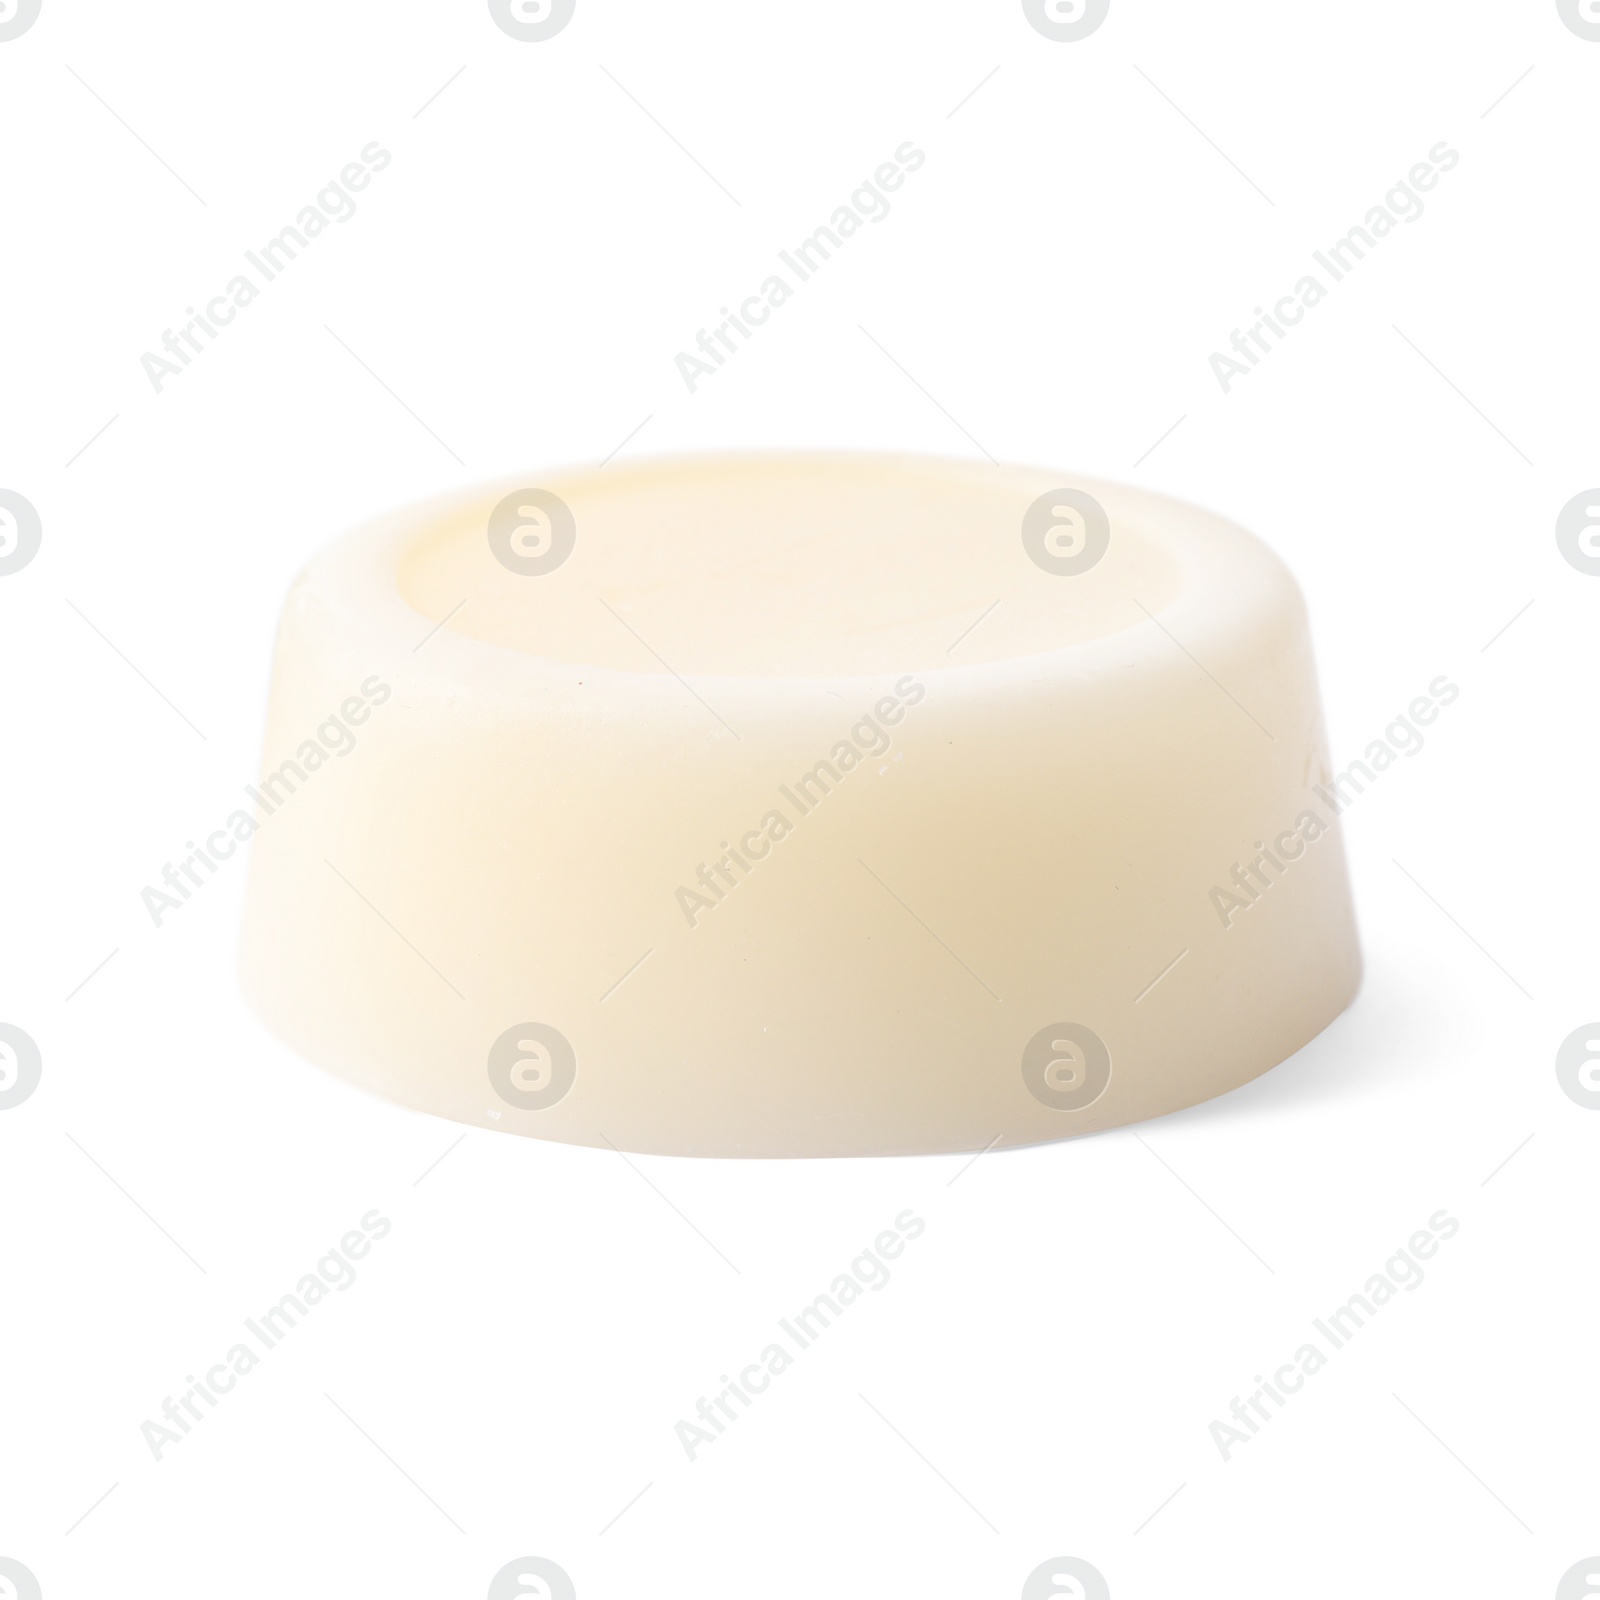 Photo of Solid shampoo bar isolated on white. Hair care